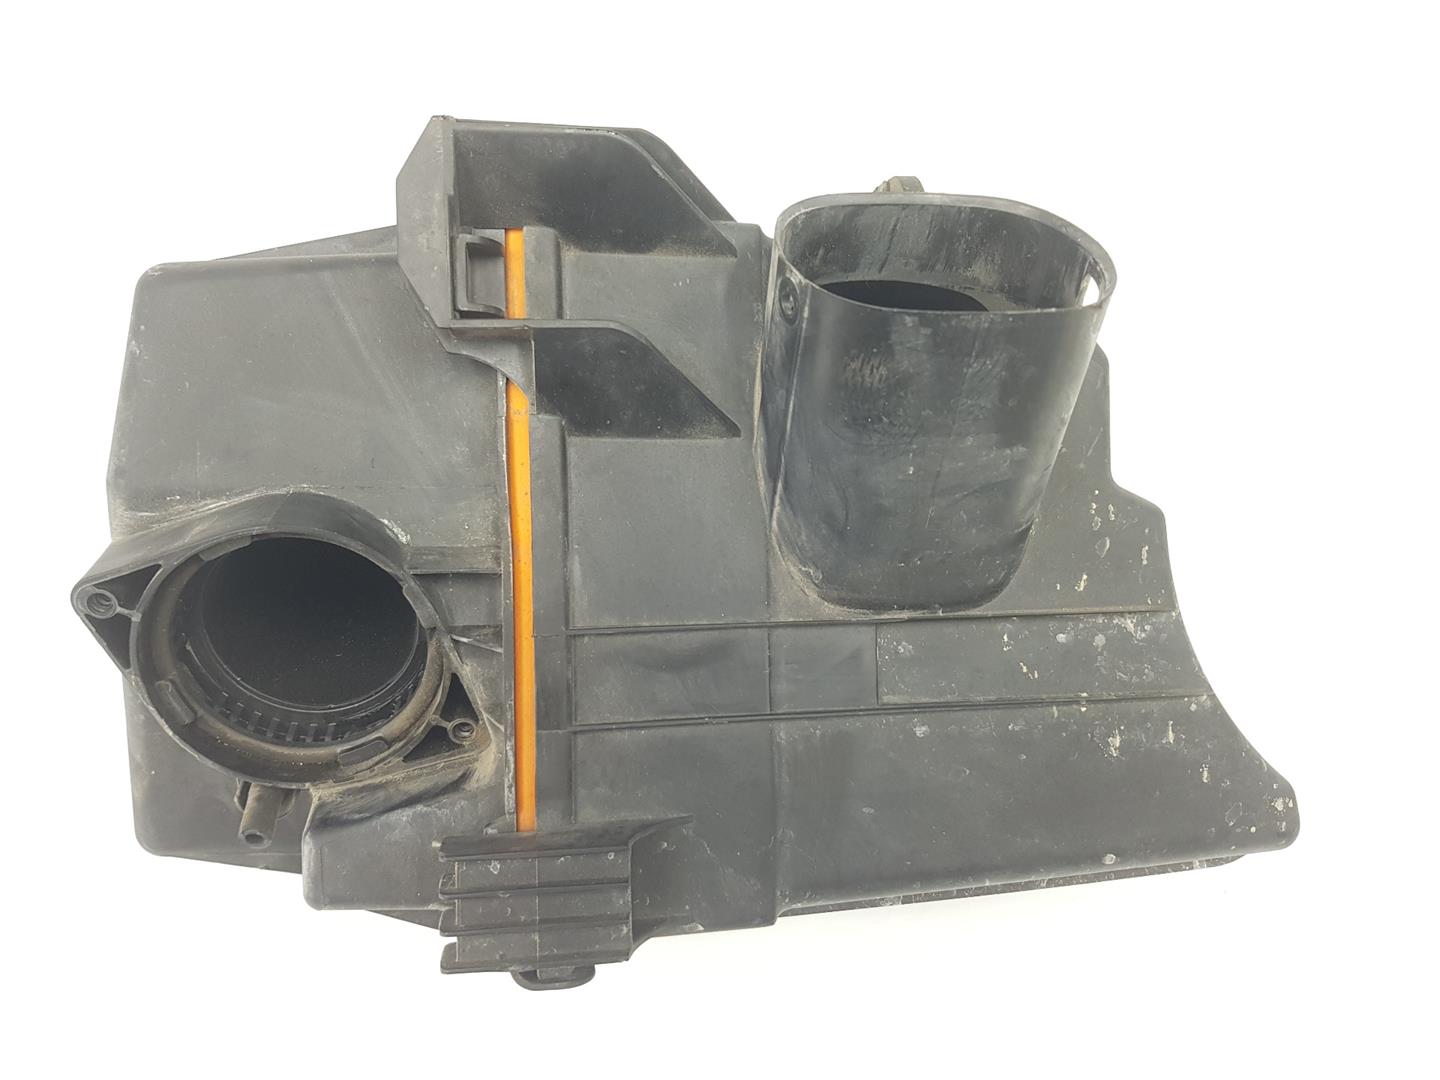 SKODA Roomster 5J  (2010-2015) Other Engine Compartment Parts 6Q0129601AR, 6Q0129607AR 23753426